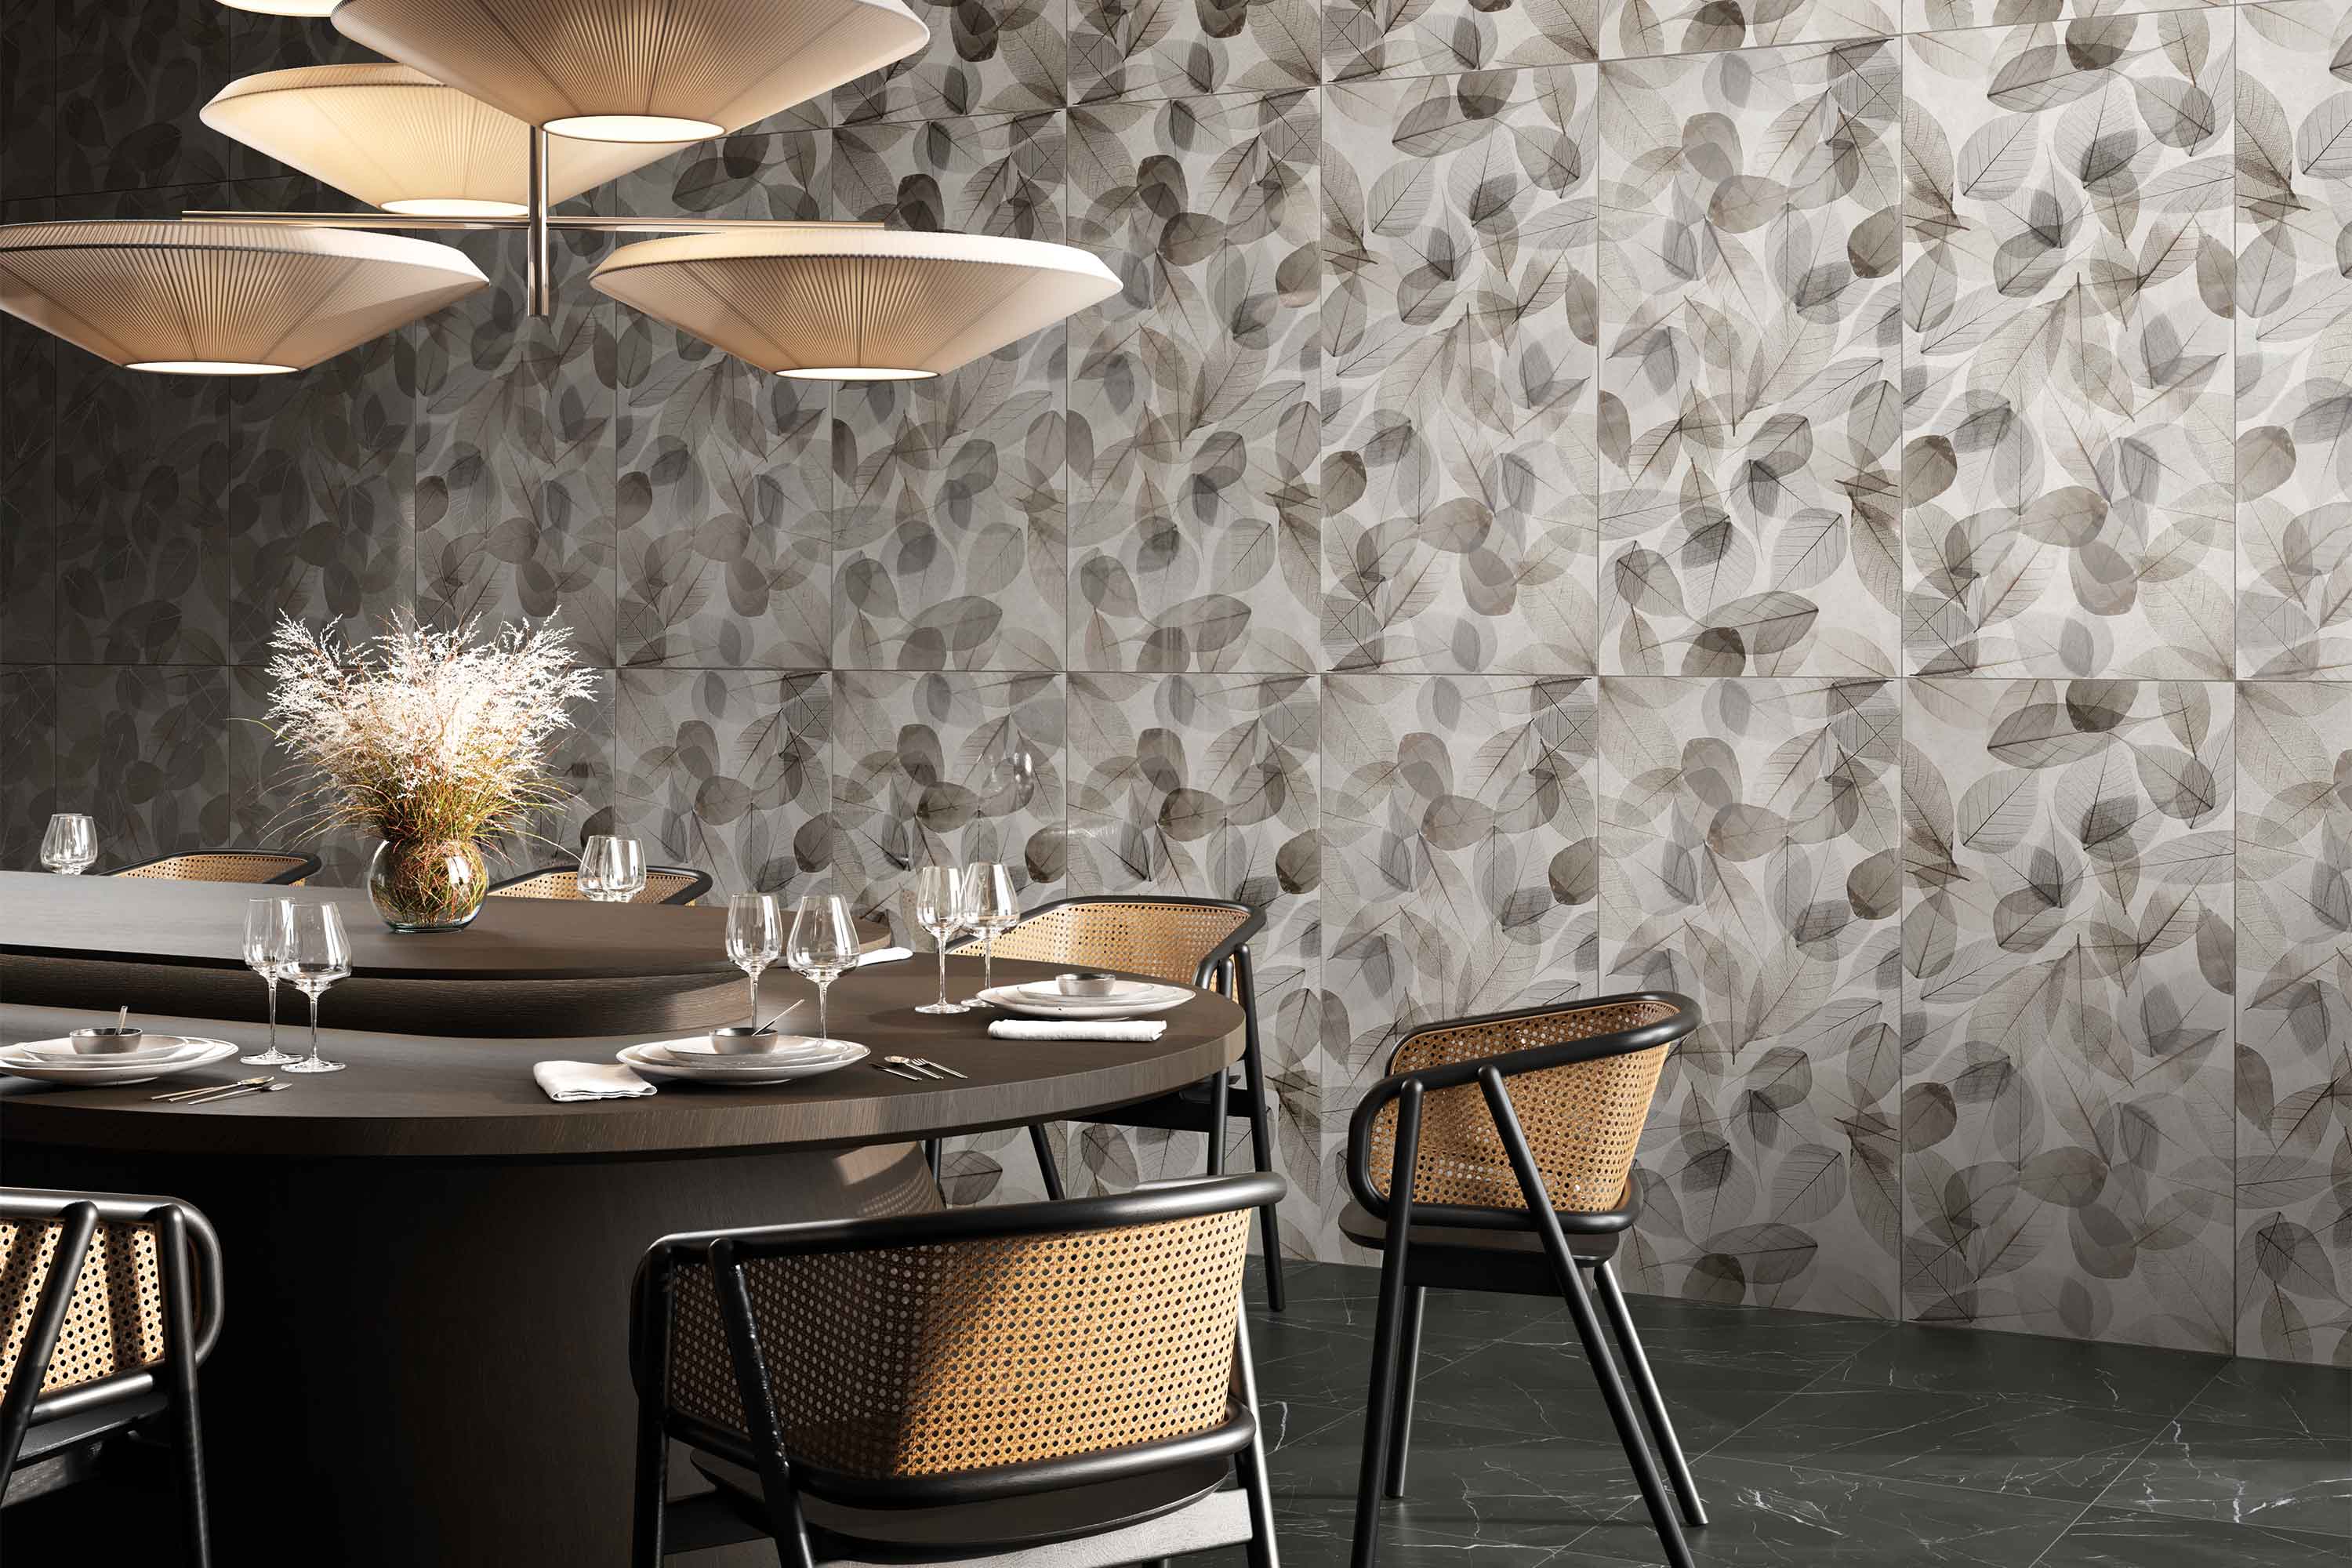 Porcelain tile collection with geometric floral pattern from Surface Group displayed in modern dining room setting